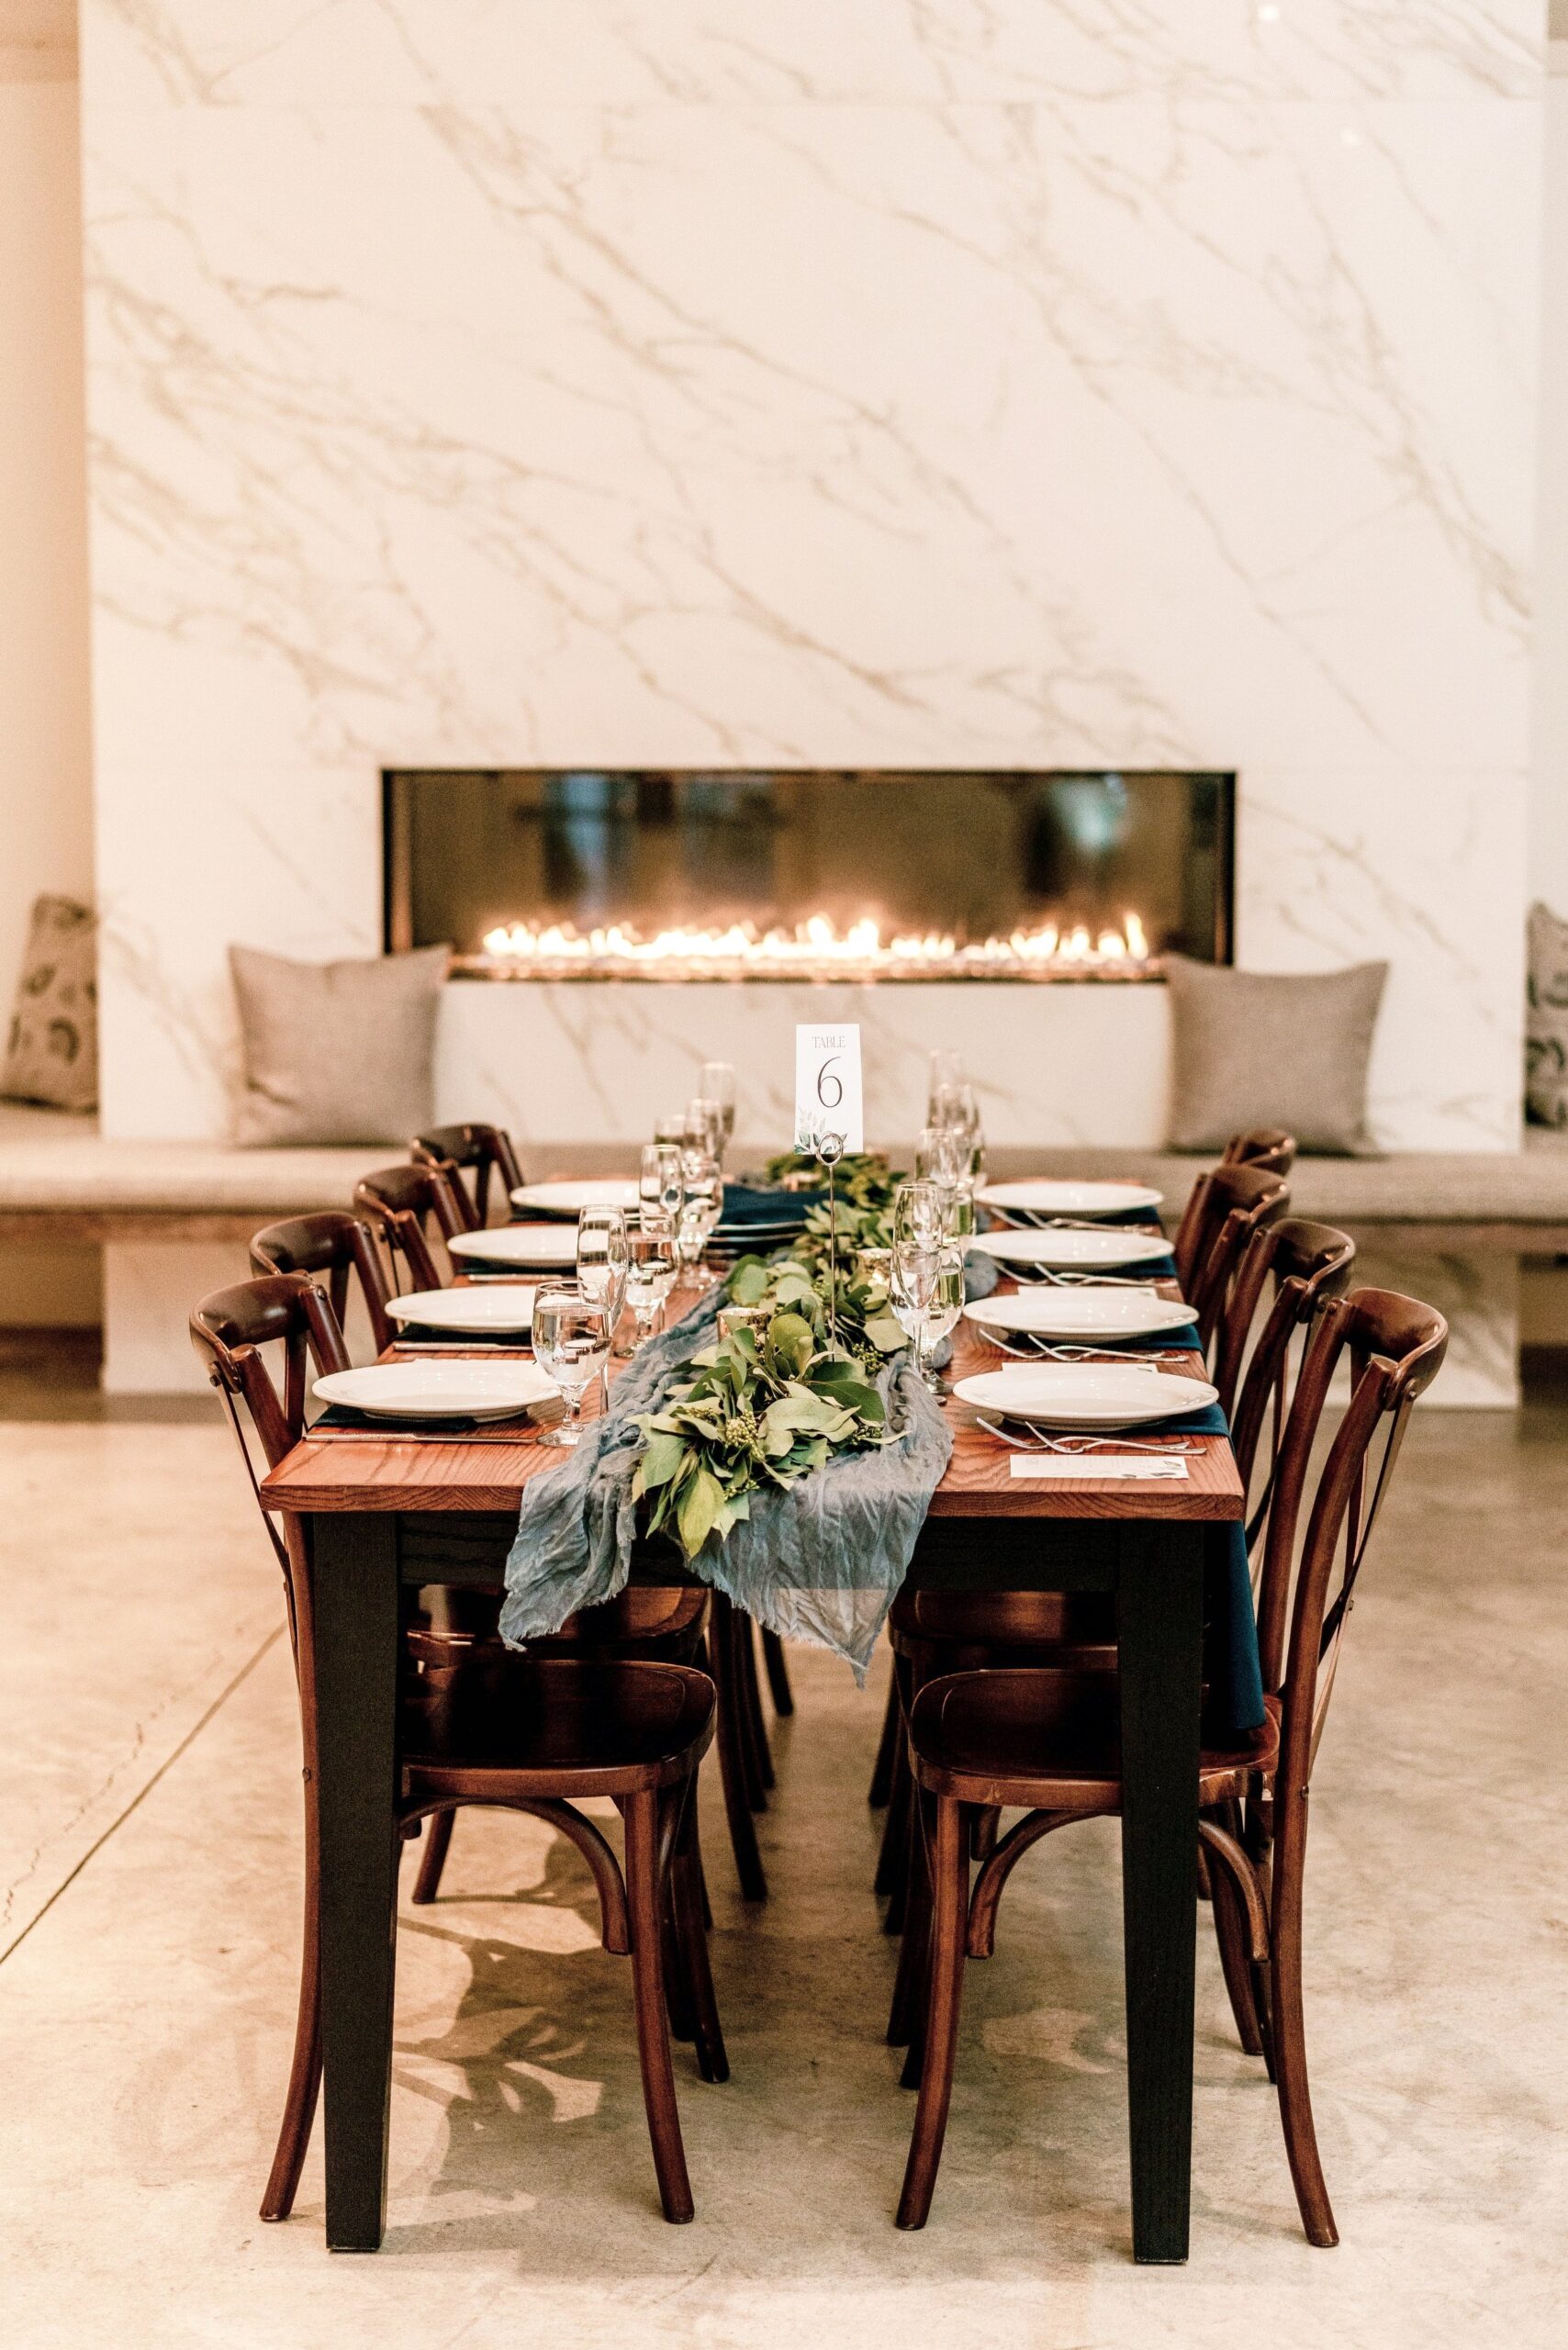 A dinner table in front of the marble fireplace set up at the reception for a wedding at Fleetwood Farm Winery in Leesburg Virginia